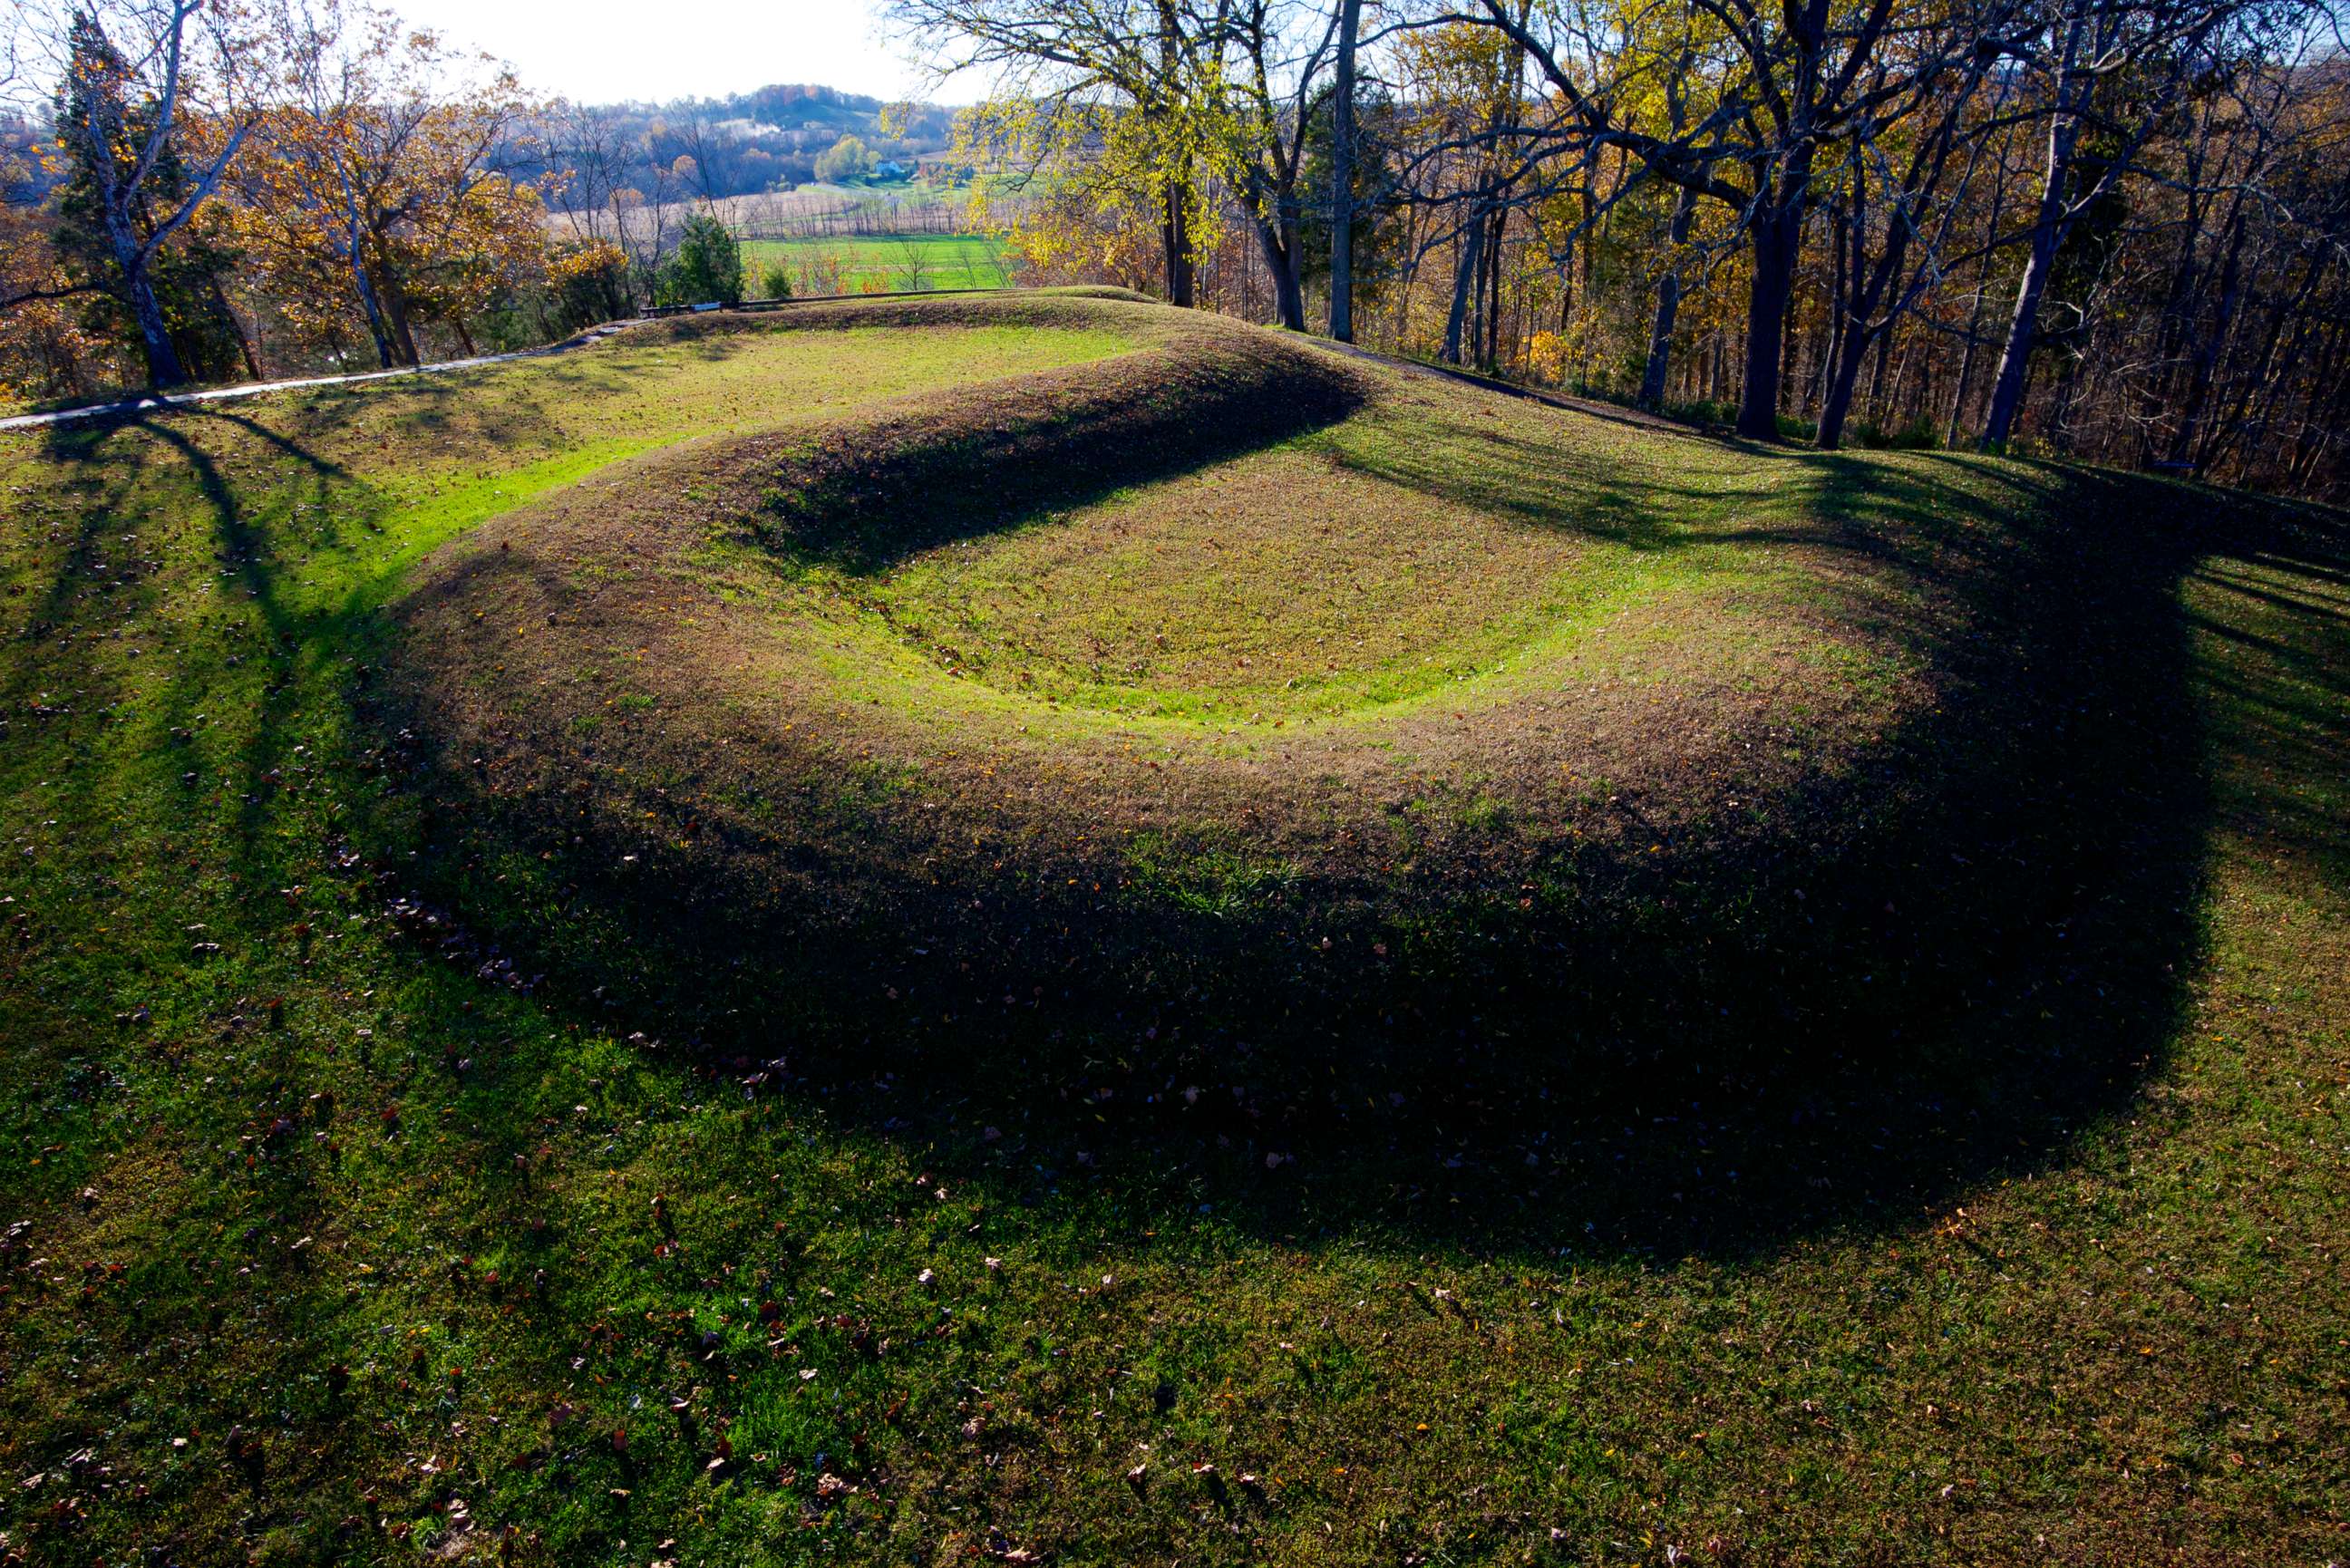 PHOTO: The Great Serpent Mound is a 1,348-foot (411 m)-long,three-foot-high prehistoric effigy mound on a plateau of the Serpent Mound crater along Ohio Brush Creek in Adams County, Ohio.